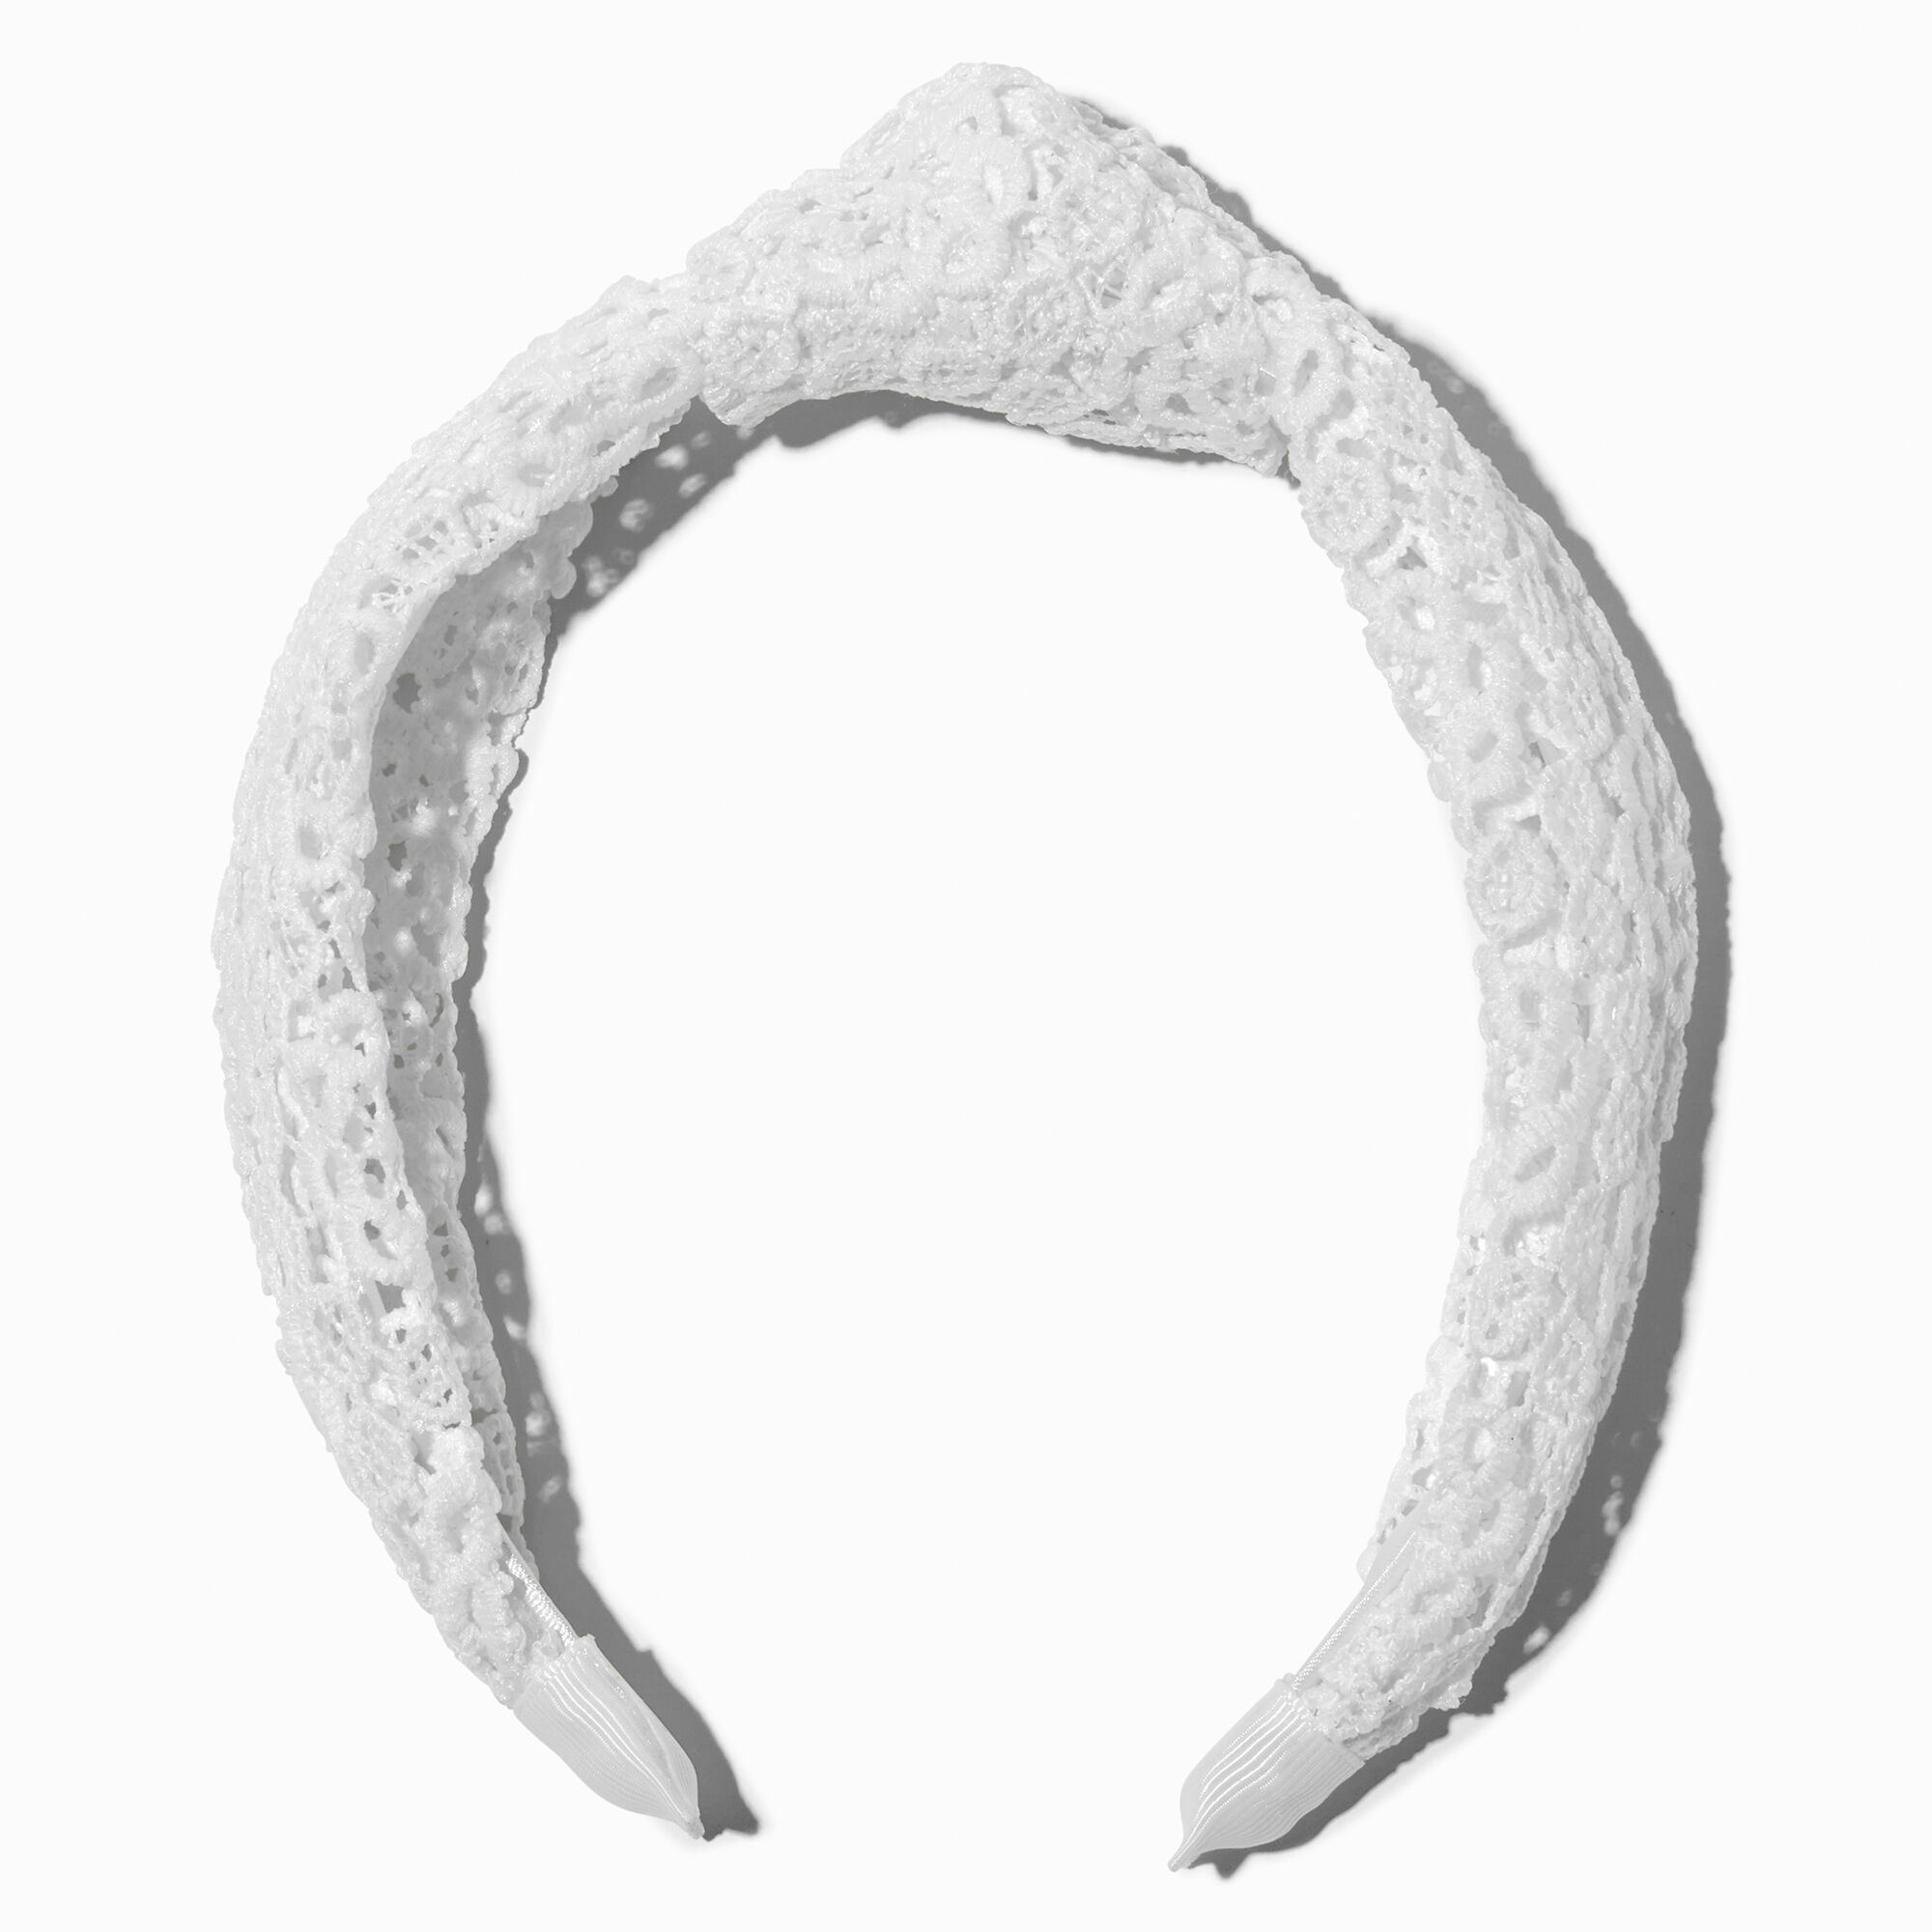 View Claires Eyelet Knotted Headband White information